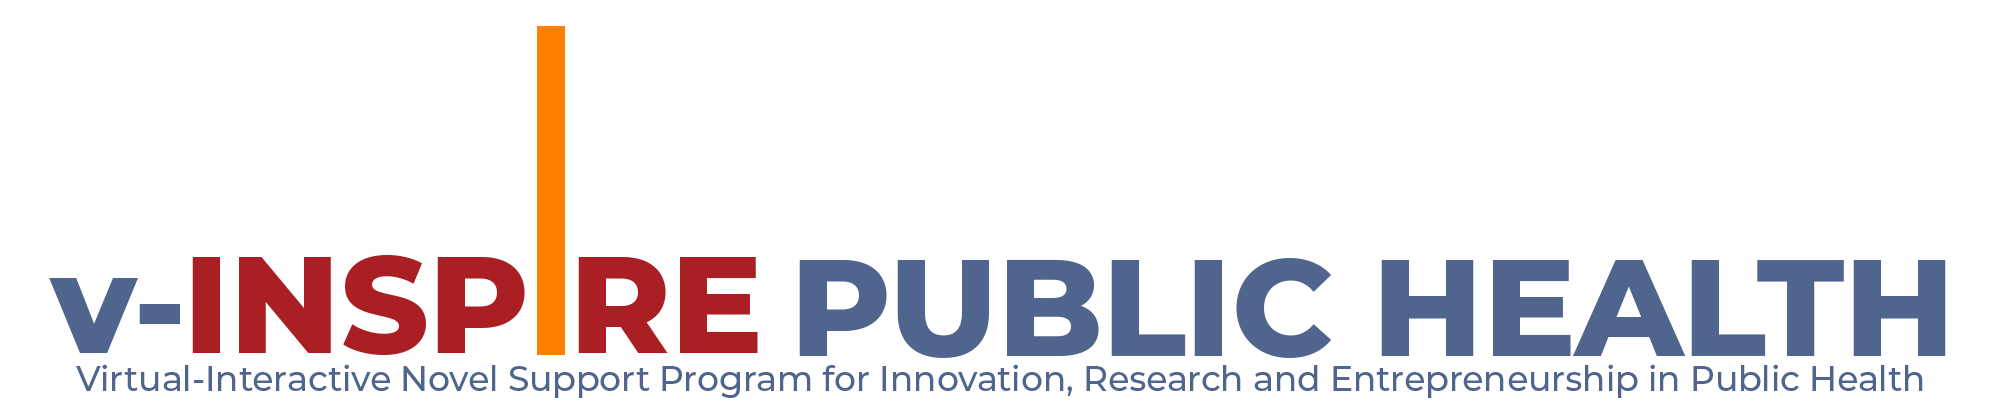 Virtual-Interactive Novel Support Program for Innovation, Research and Entrepreneurship in Public Health